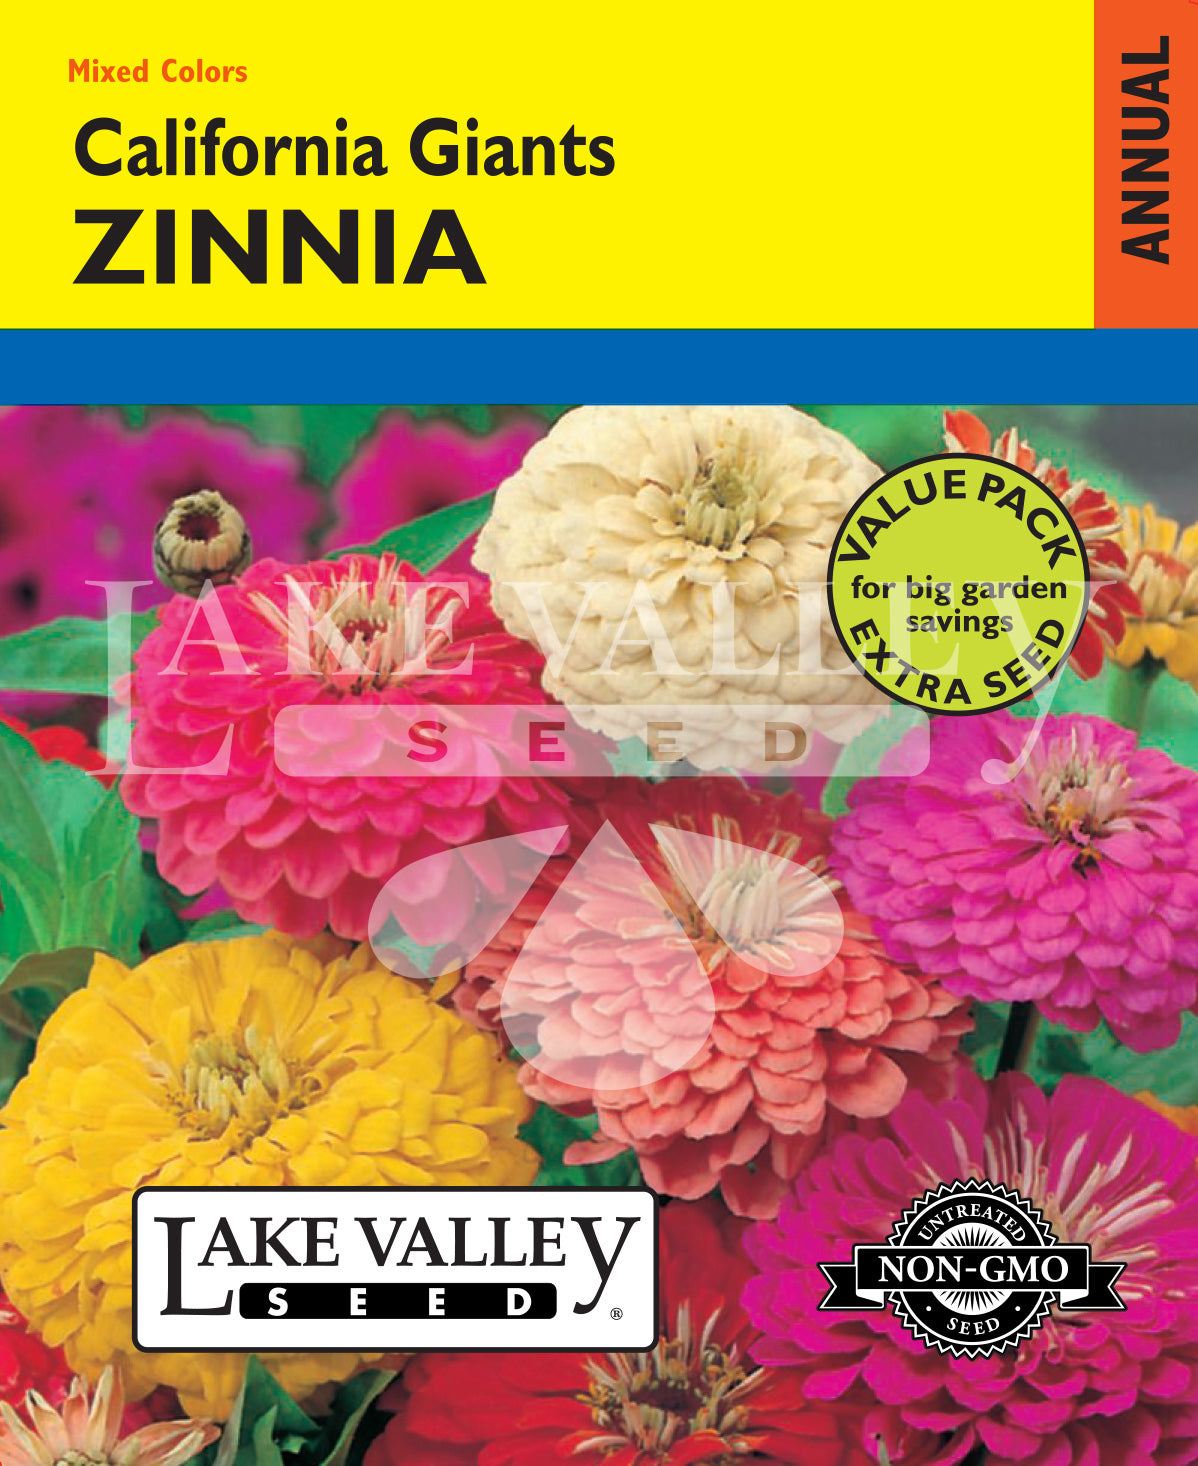 Zinnia California Giants Mixed Colors Value Pack Heirloom